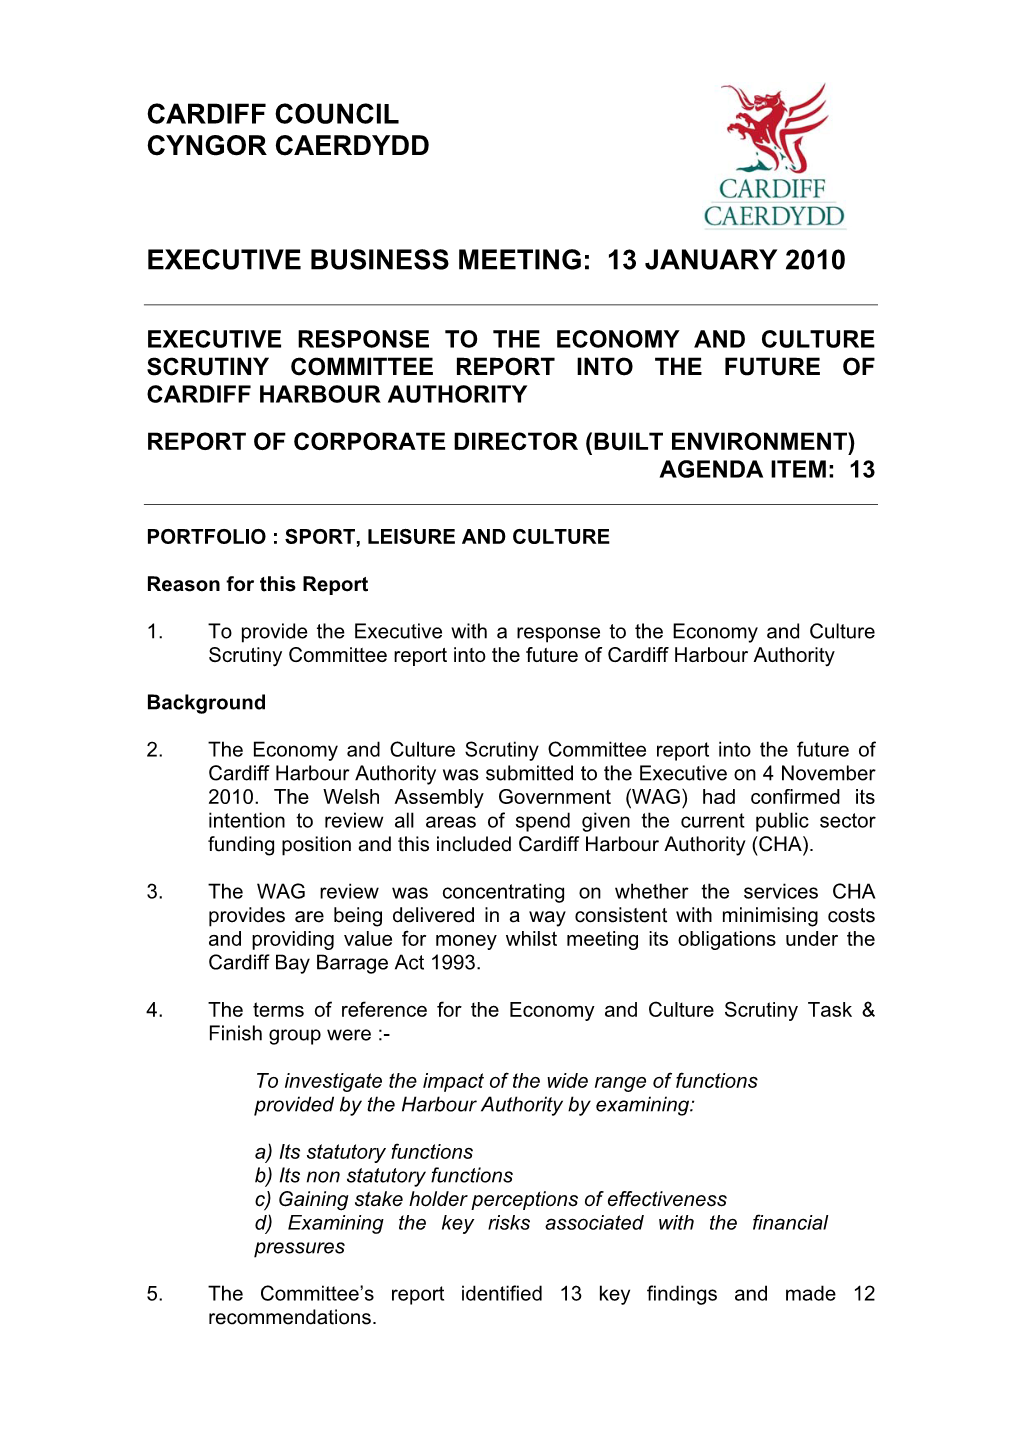 Executive Response to the Economy and Culture Scrutiny Committee Report Into the Future of Cardiff Harbour Authority